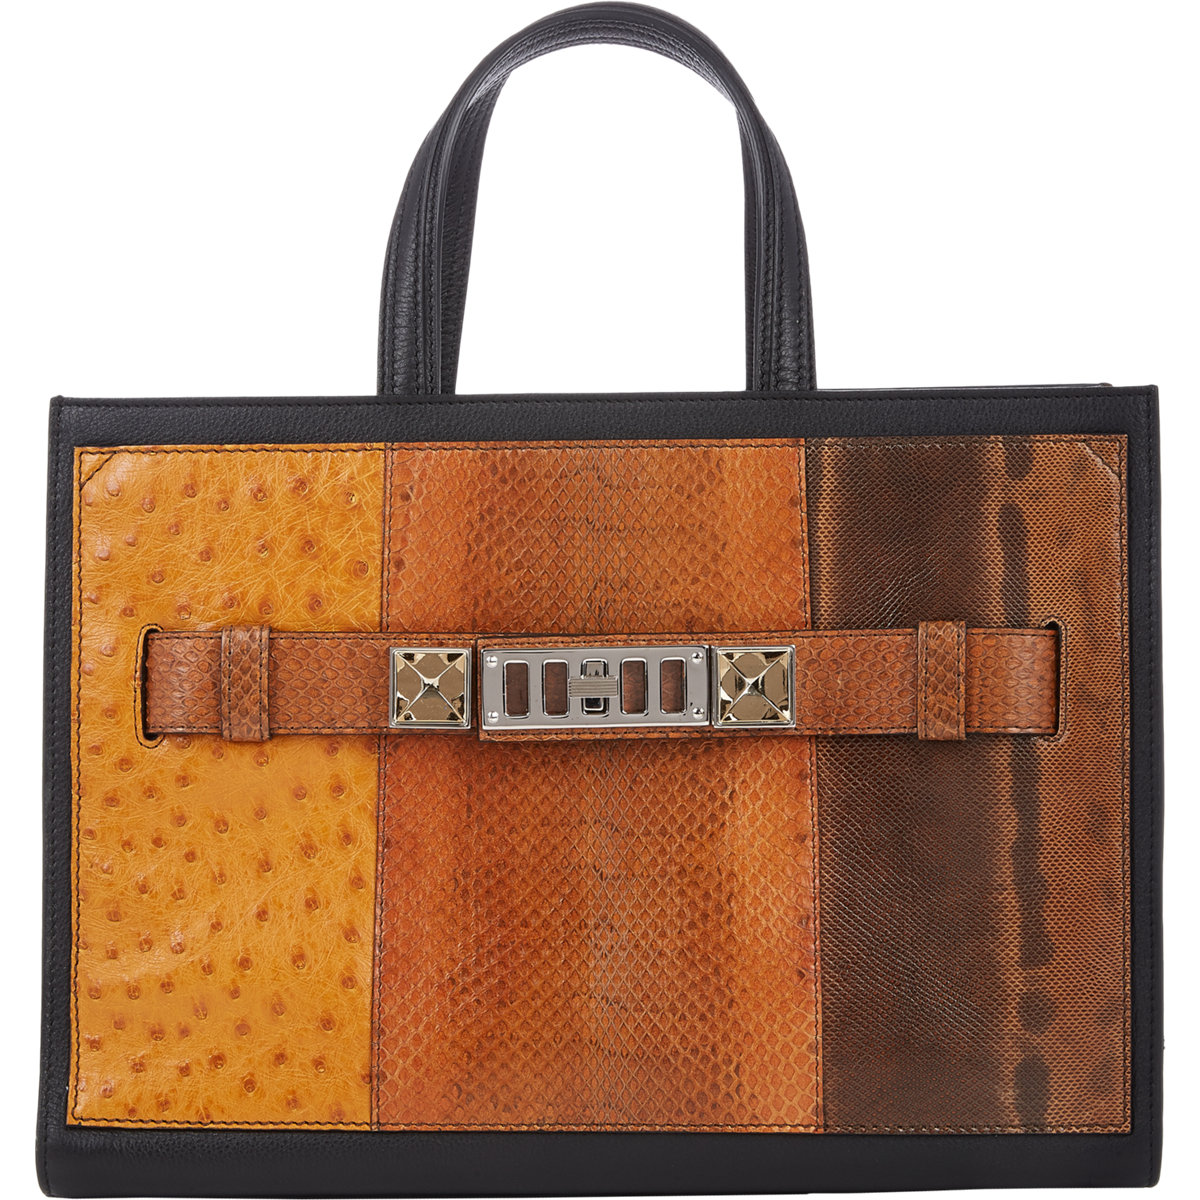 Proenza Schouler Caramel Ostrich/Ayers/Karung Patchwork PS11 Small Tote Bag